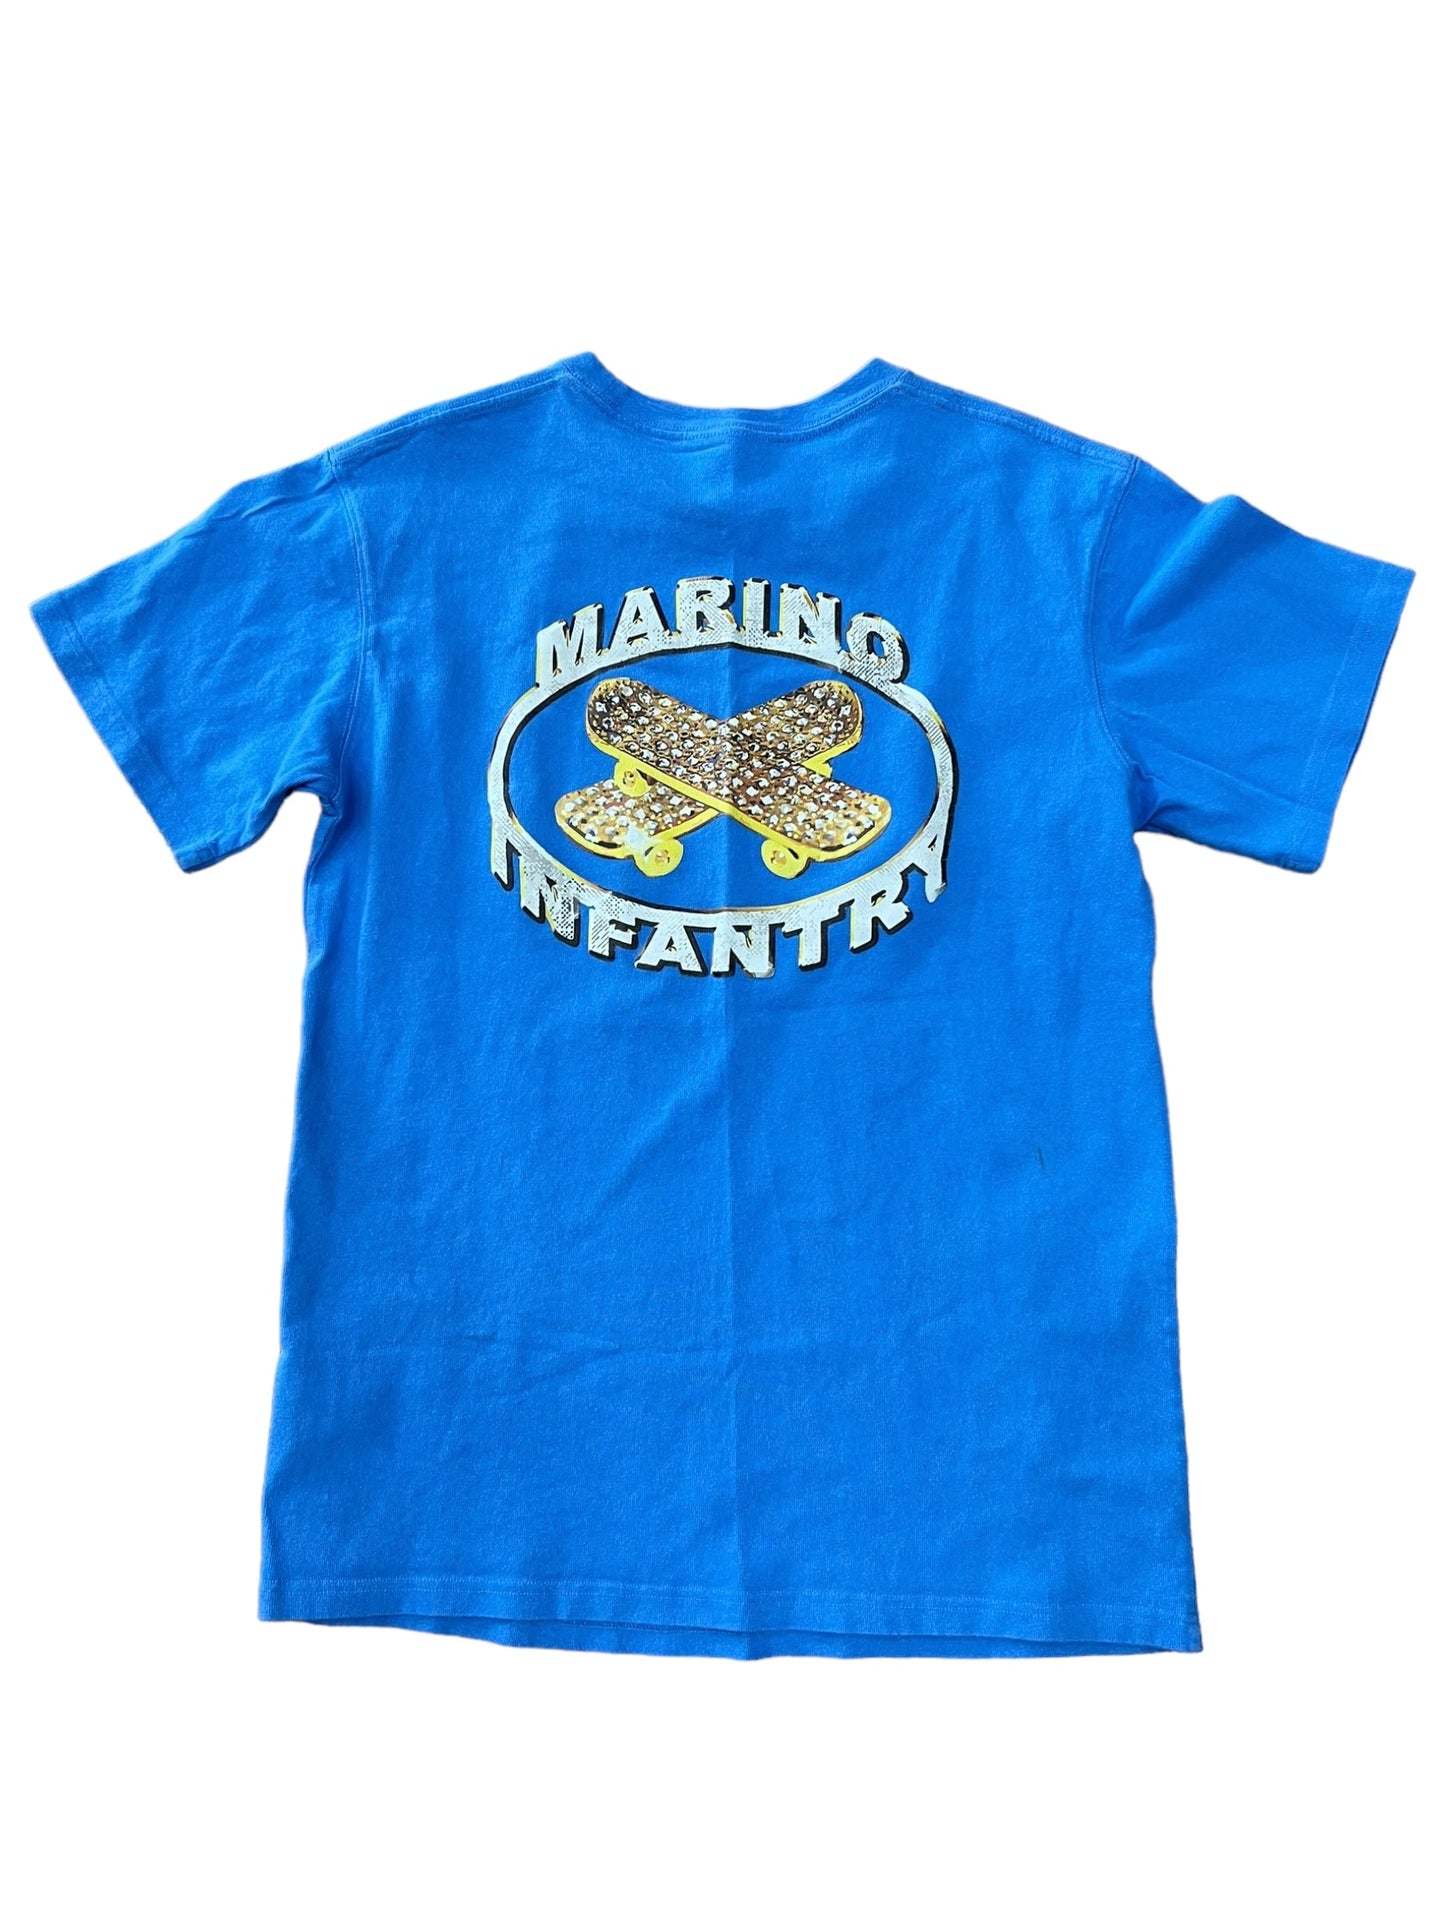 Marino infantry X needles size 4 tee pre-owned